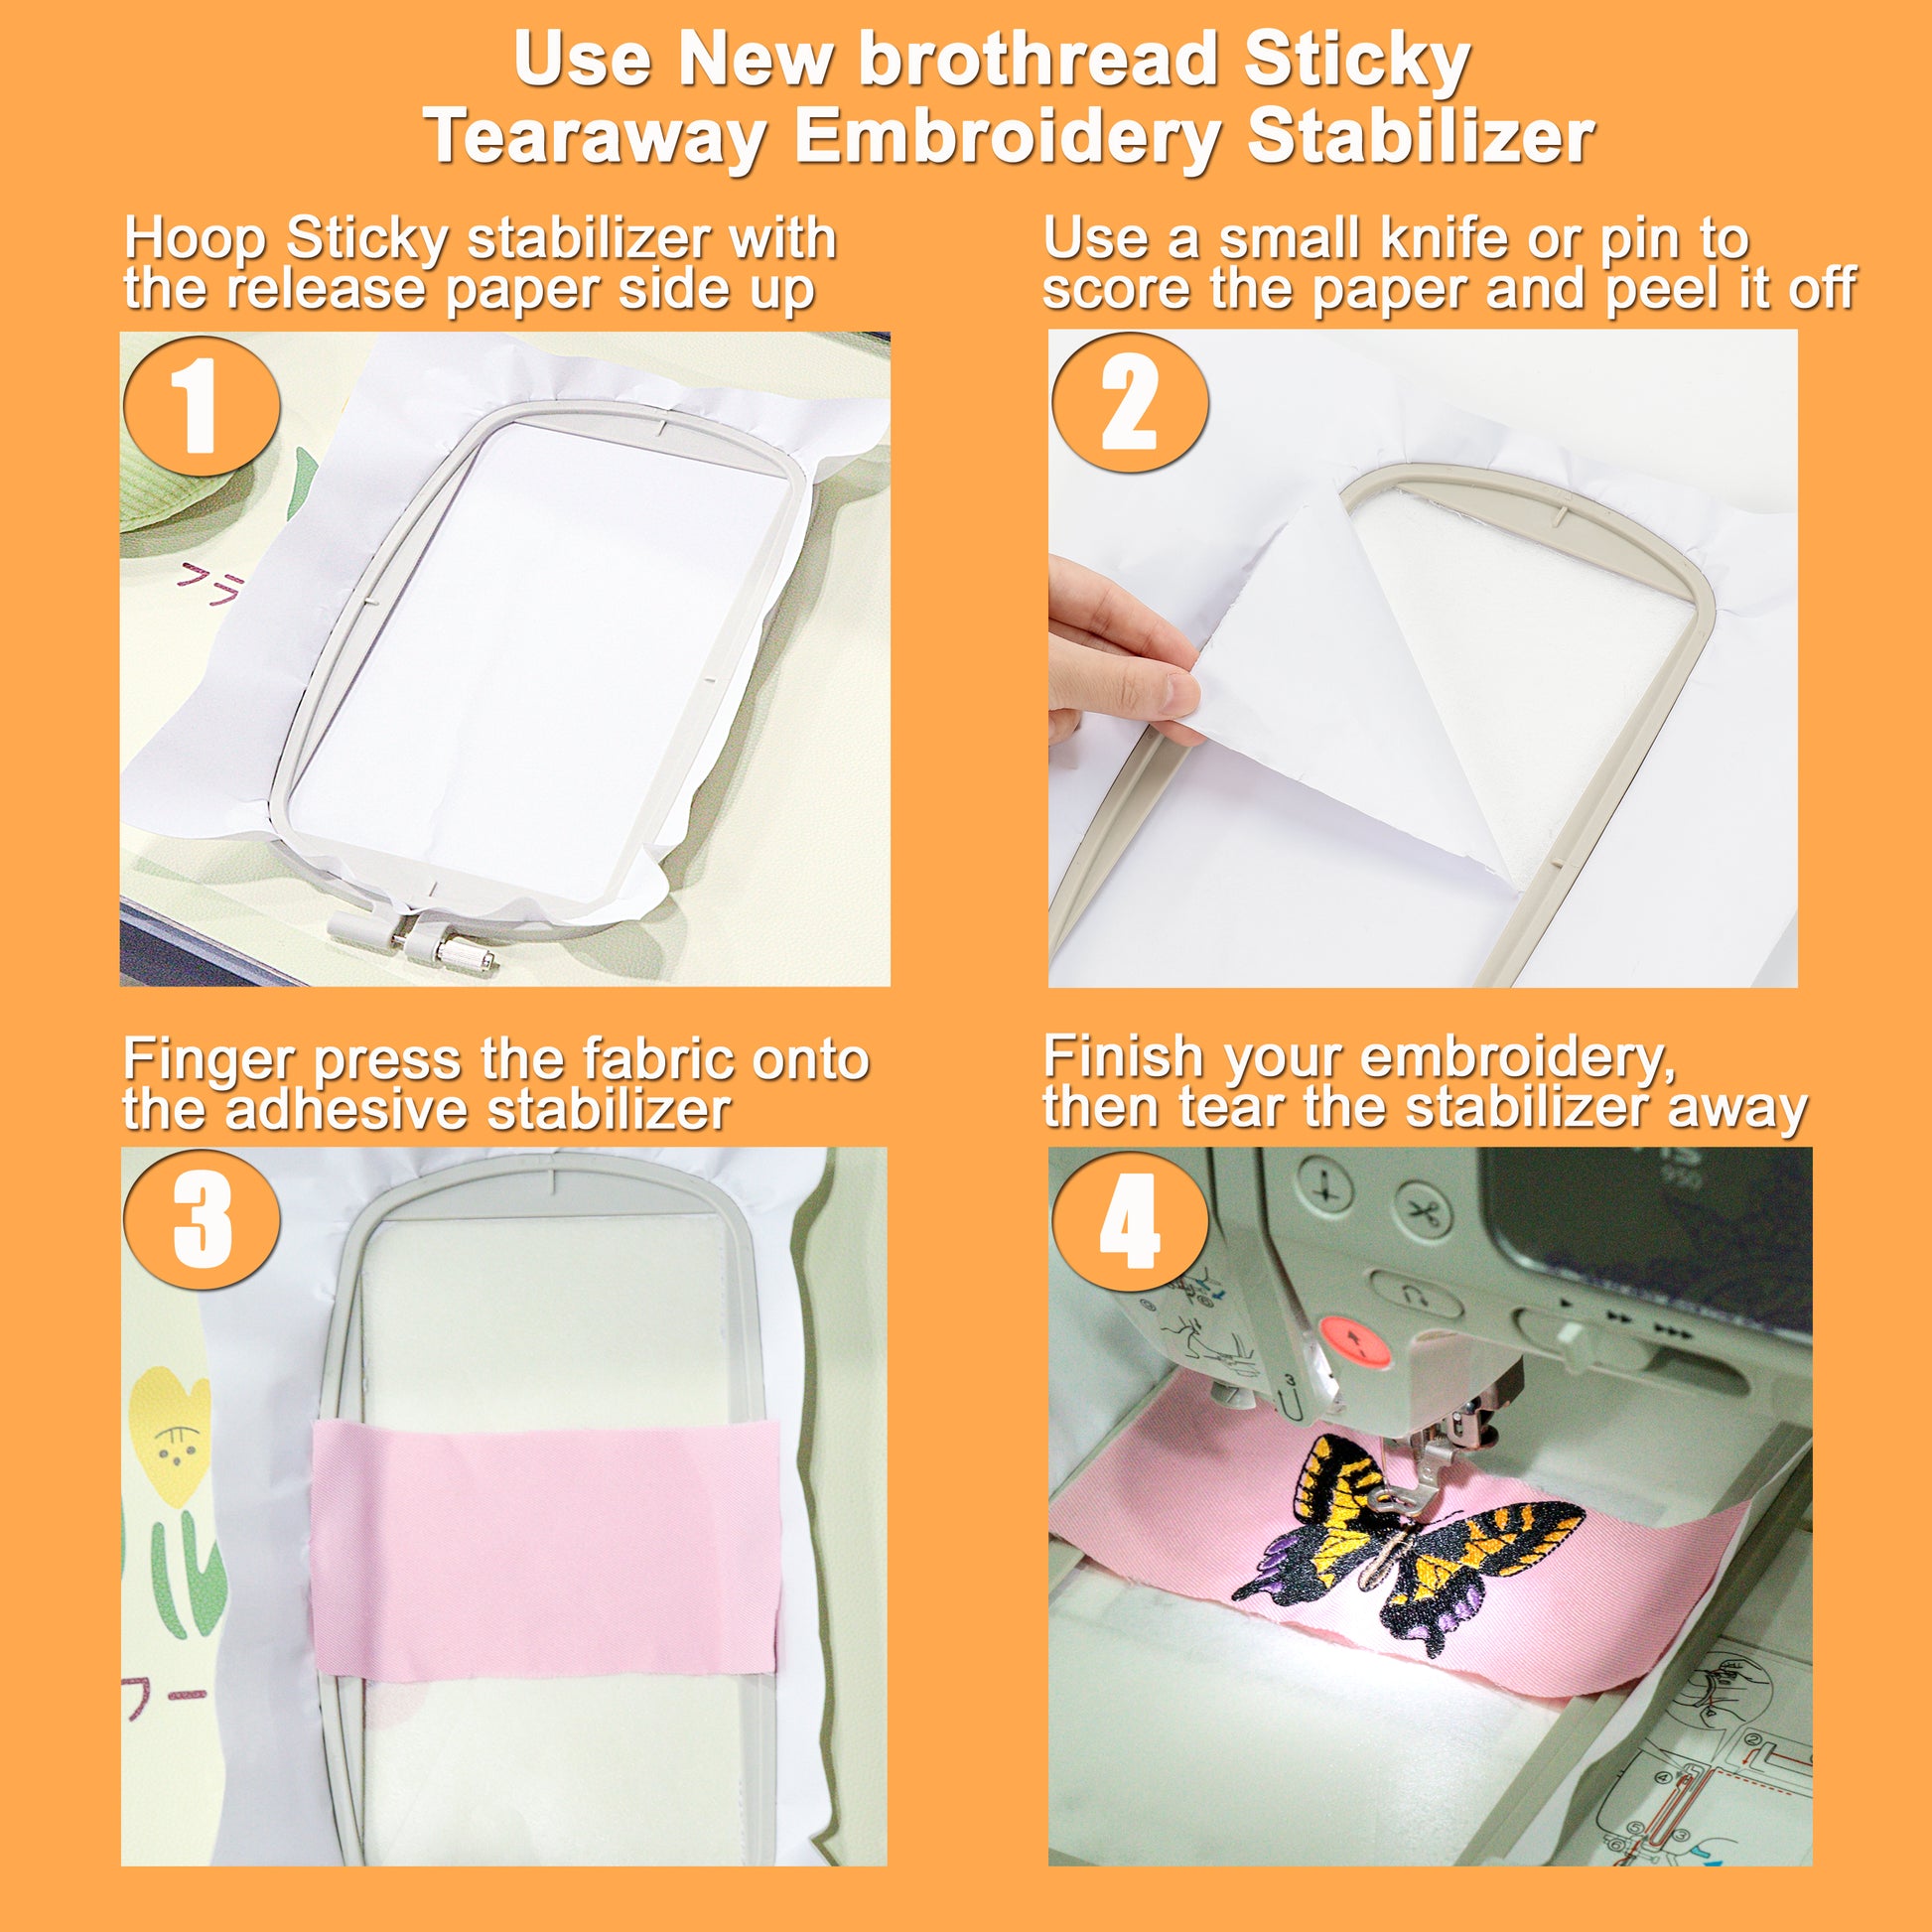 Sticky Back Tearaway Embroidery Stabilizer by Threadart | 50 8 x 8 Sheets  | For Machine Embroidery